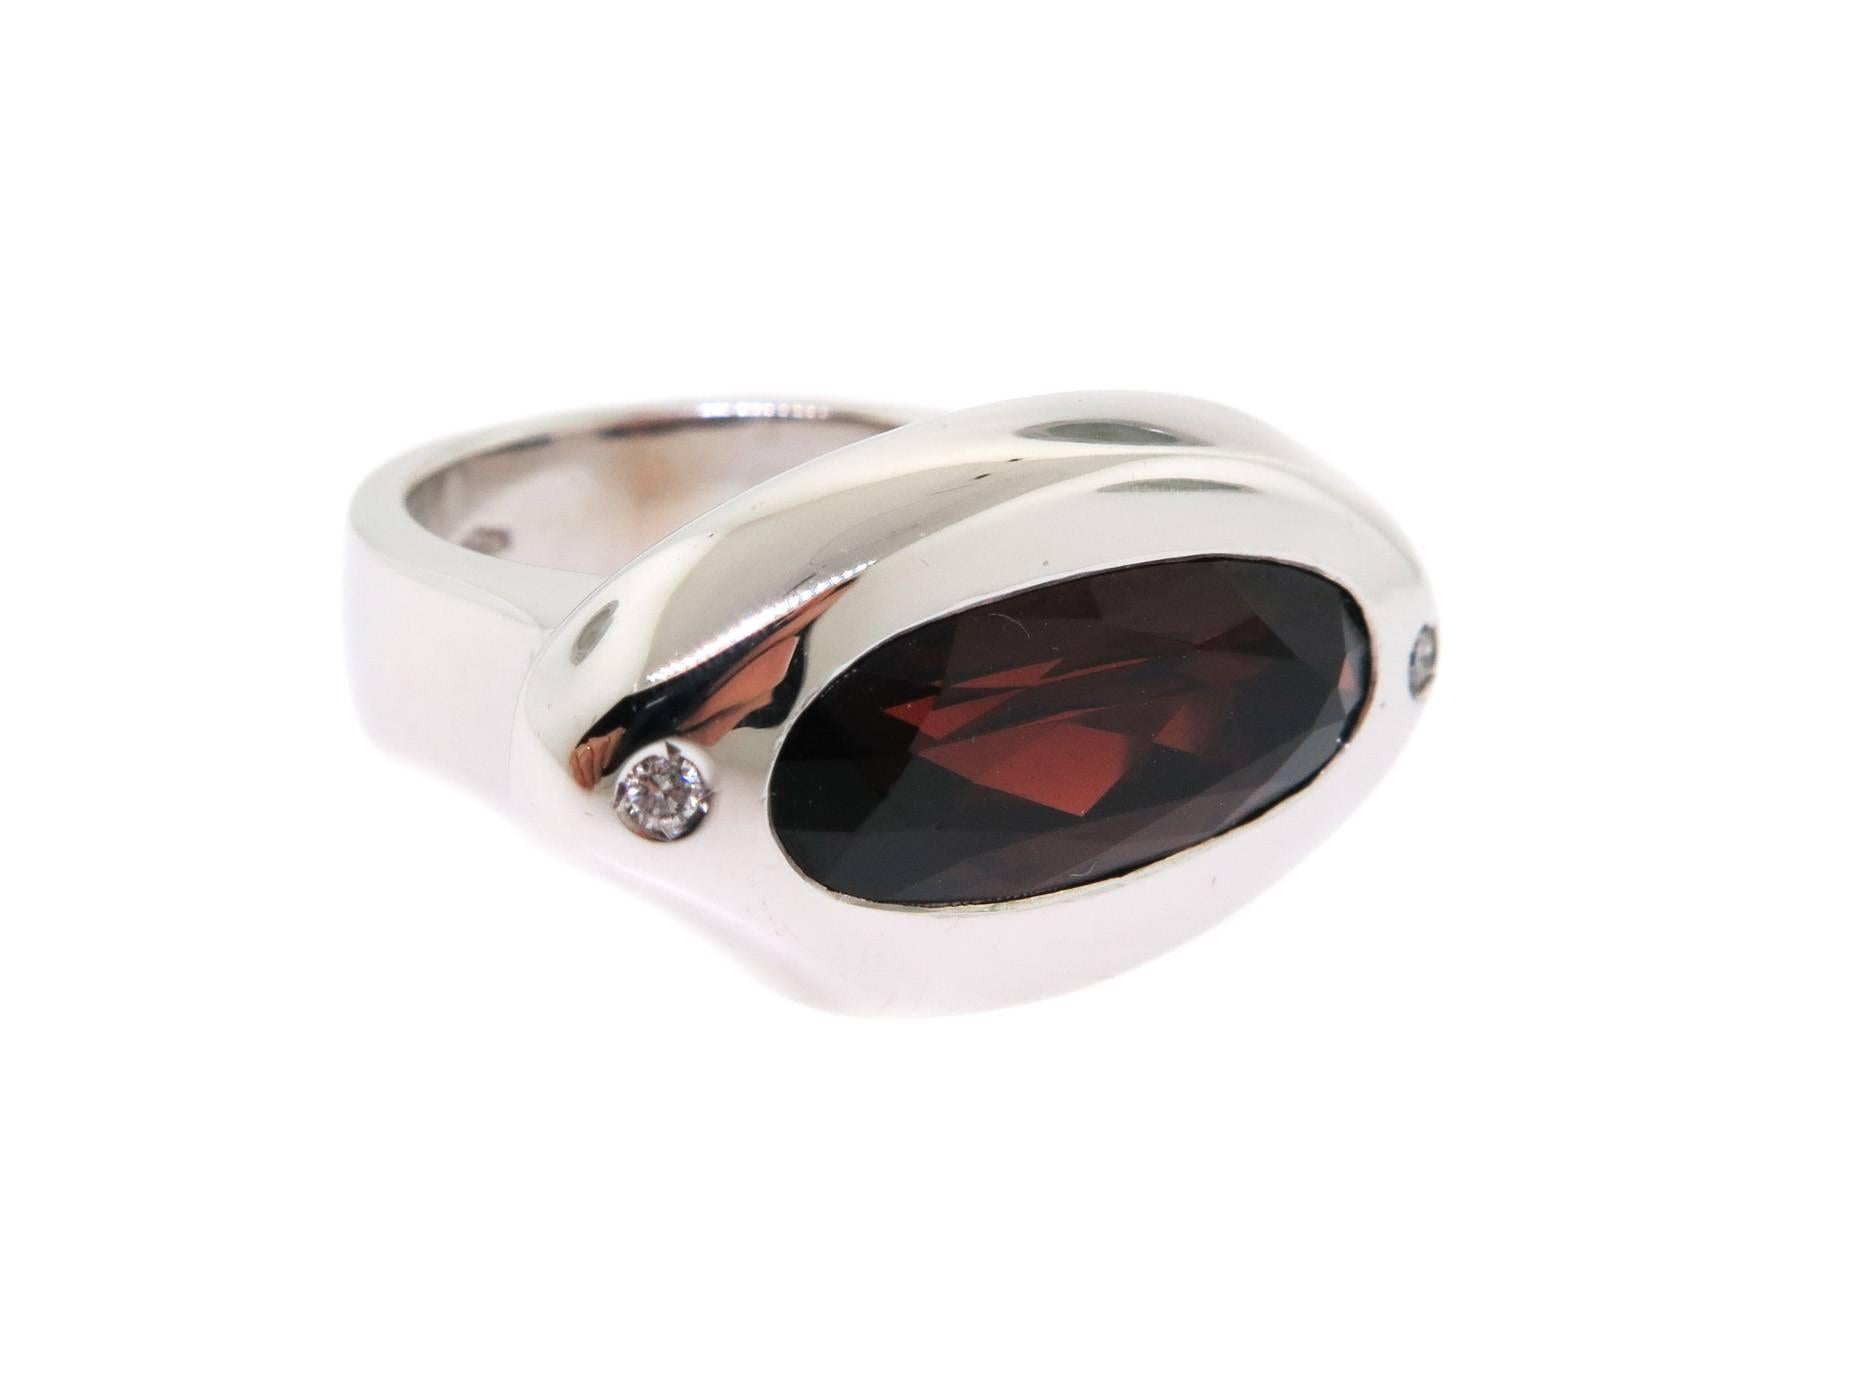 Eye-catching and compelling... wonderfully set garnet in a very attractive smooth 18 karat white gold bezel, exceptional design by Manfredi.
Ring finger size is 6.5